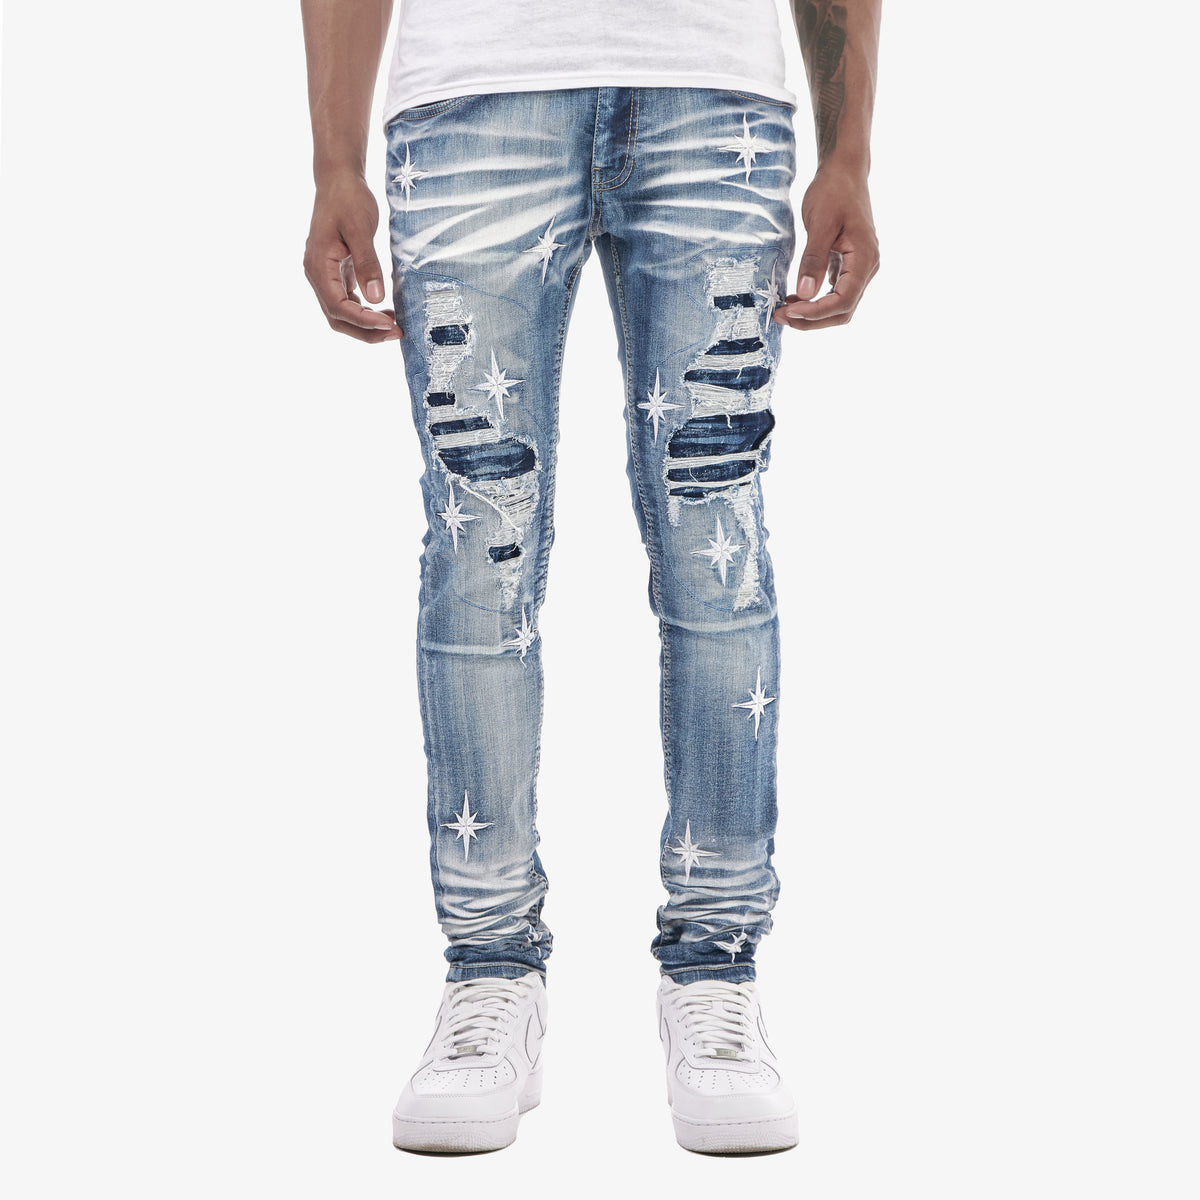 LIGHT SAND BLUE WASHED JEANS W/ STAR EMBROIDERY